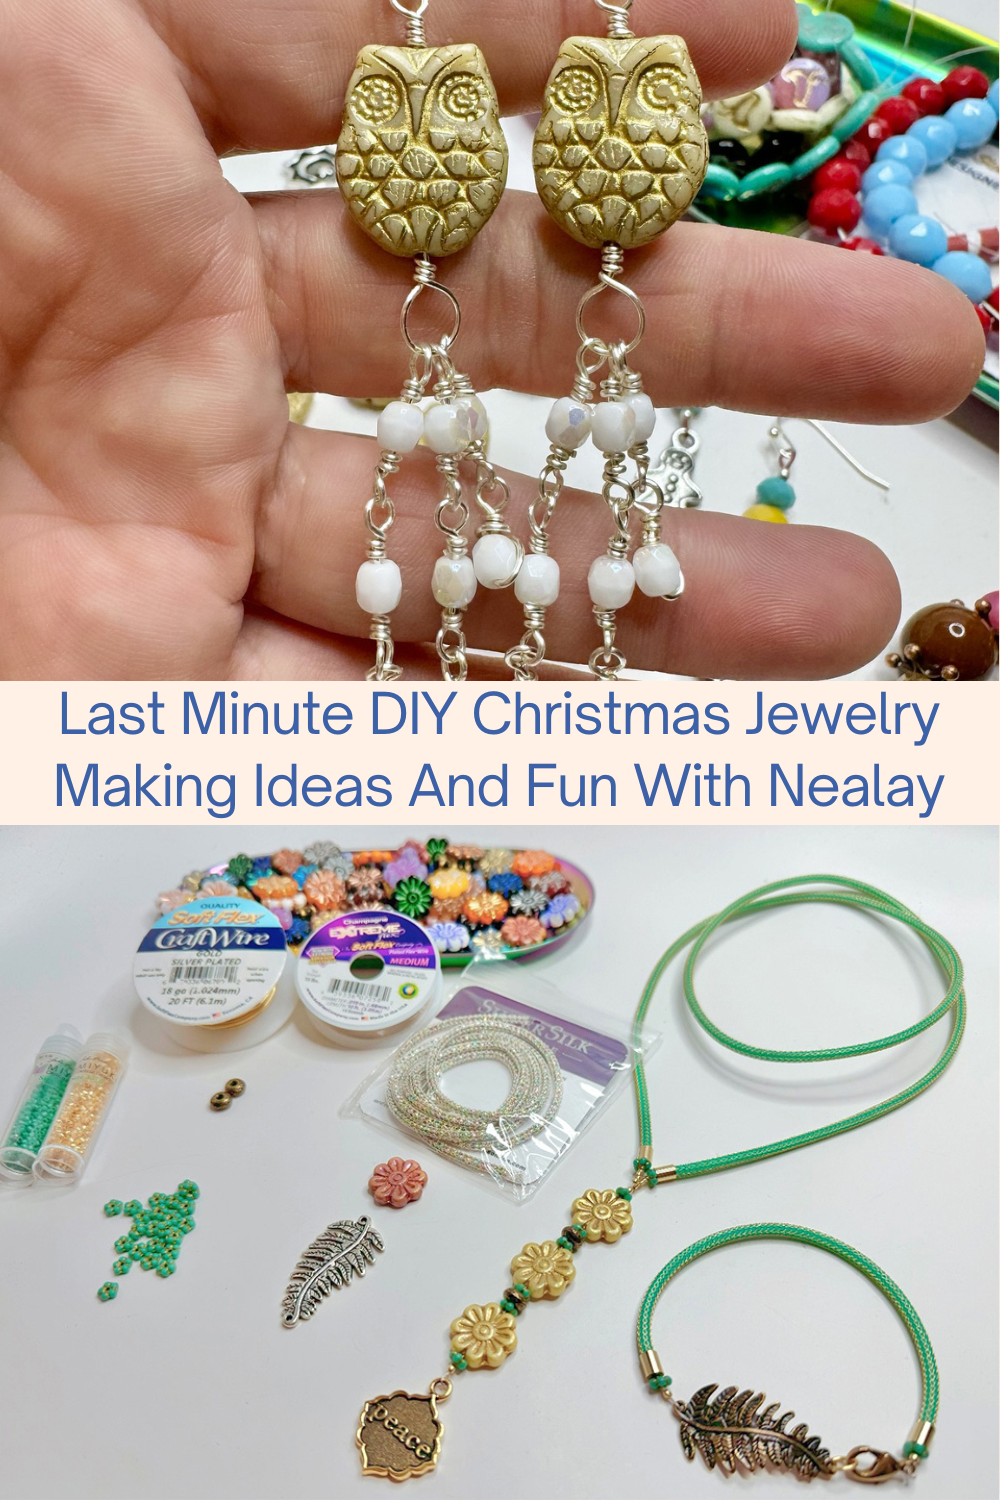 Last Minute DIY Christmas Jewelry Making Ideas And Fun With Nealay Patel Collage